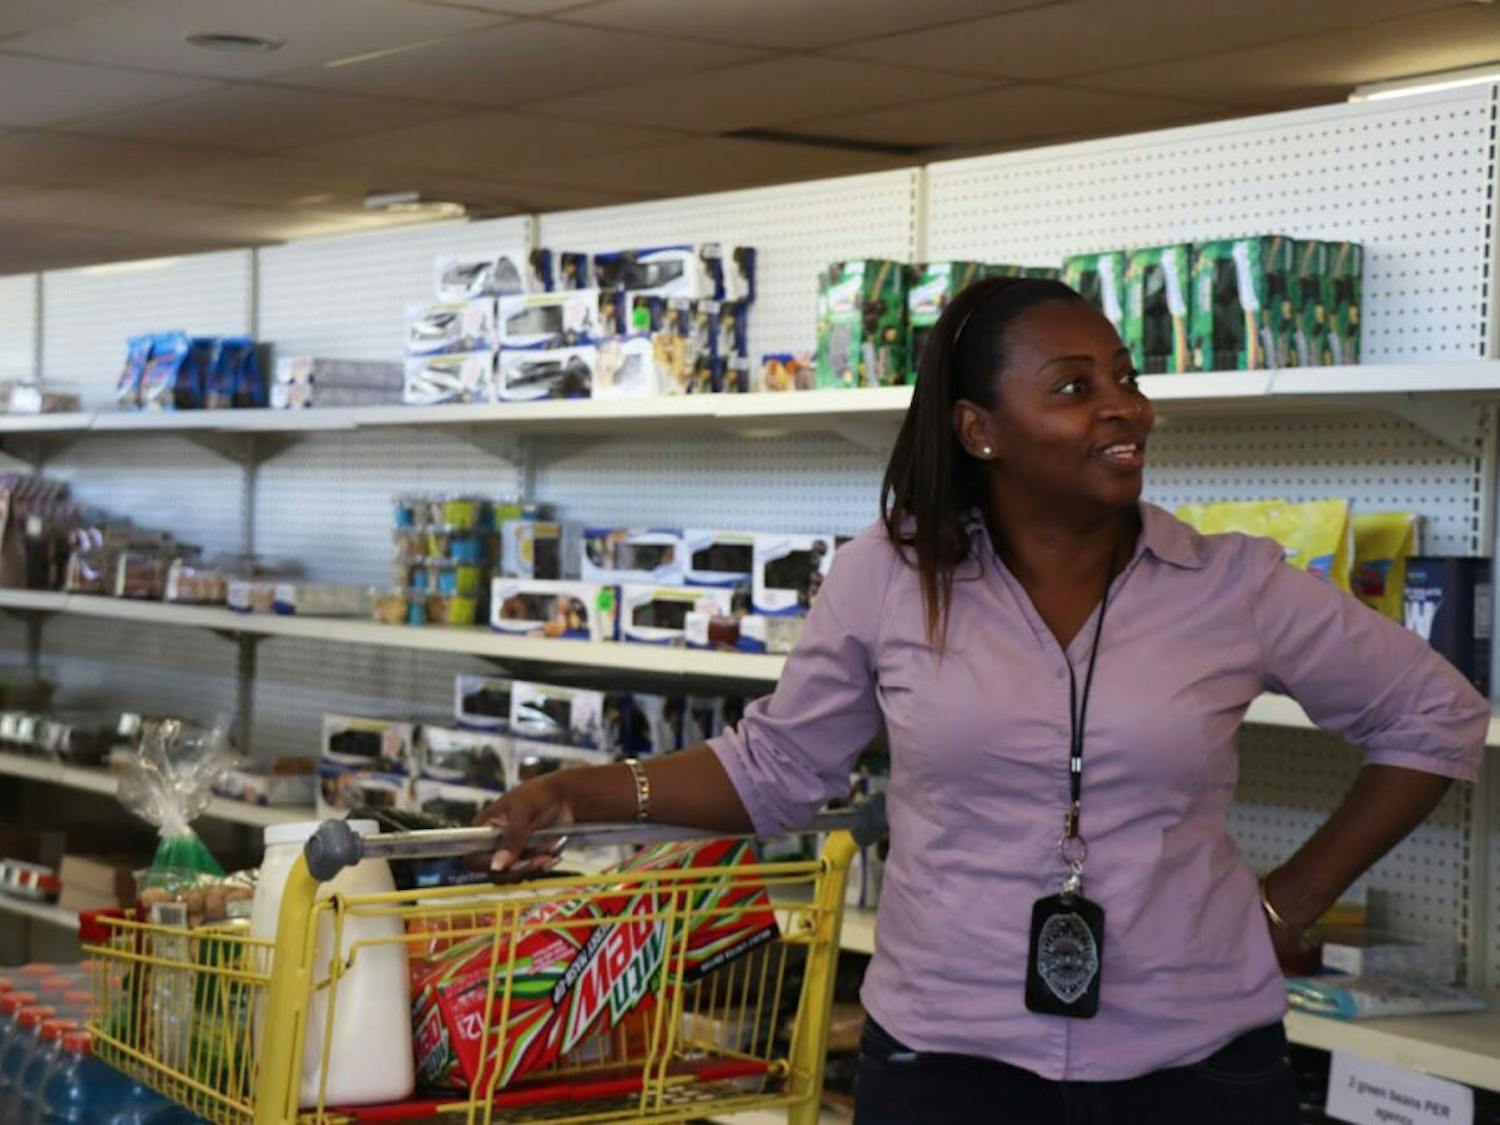 Pastor Crystal Griffin stops to talk to a friend while shopping for her ministry on Friday afternoon at the Bread of the Mighty Food Bank. The food bank distributes to five surrounding counties, including Alachua.